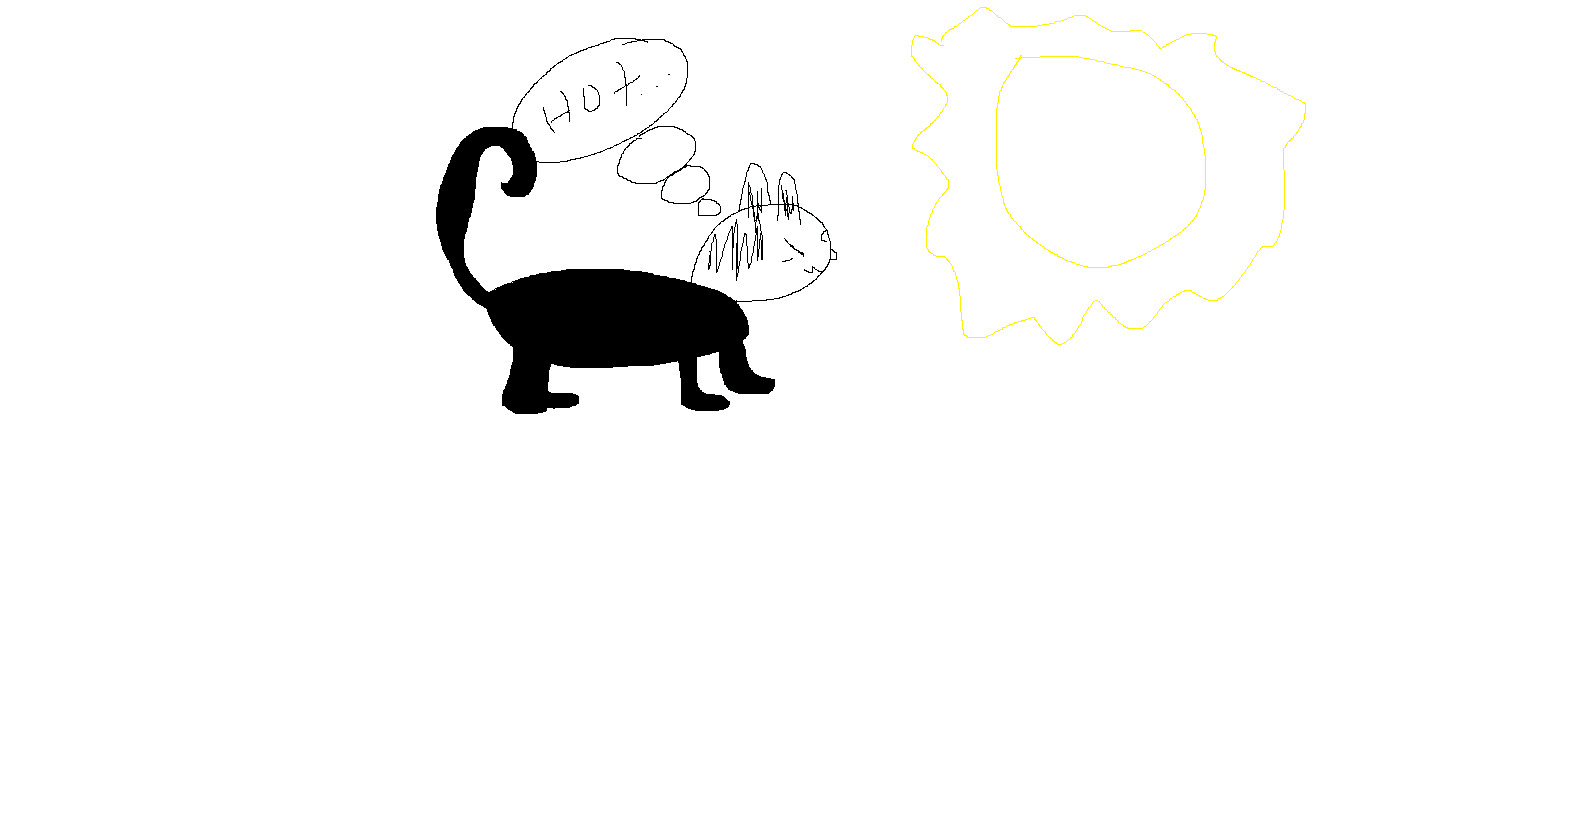 Pictures Of Cats And Dogs To Draw